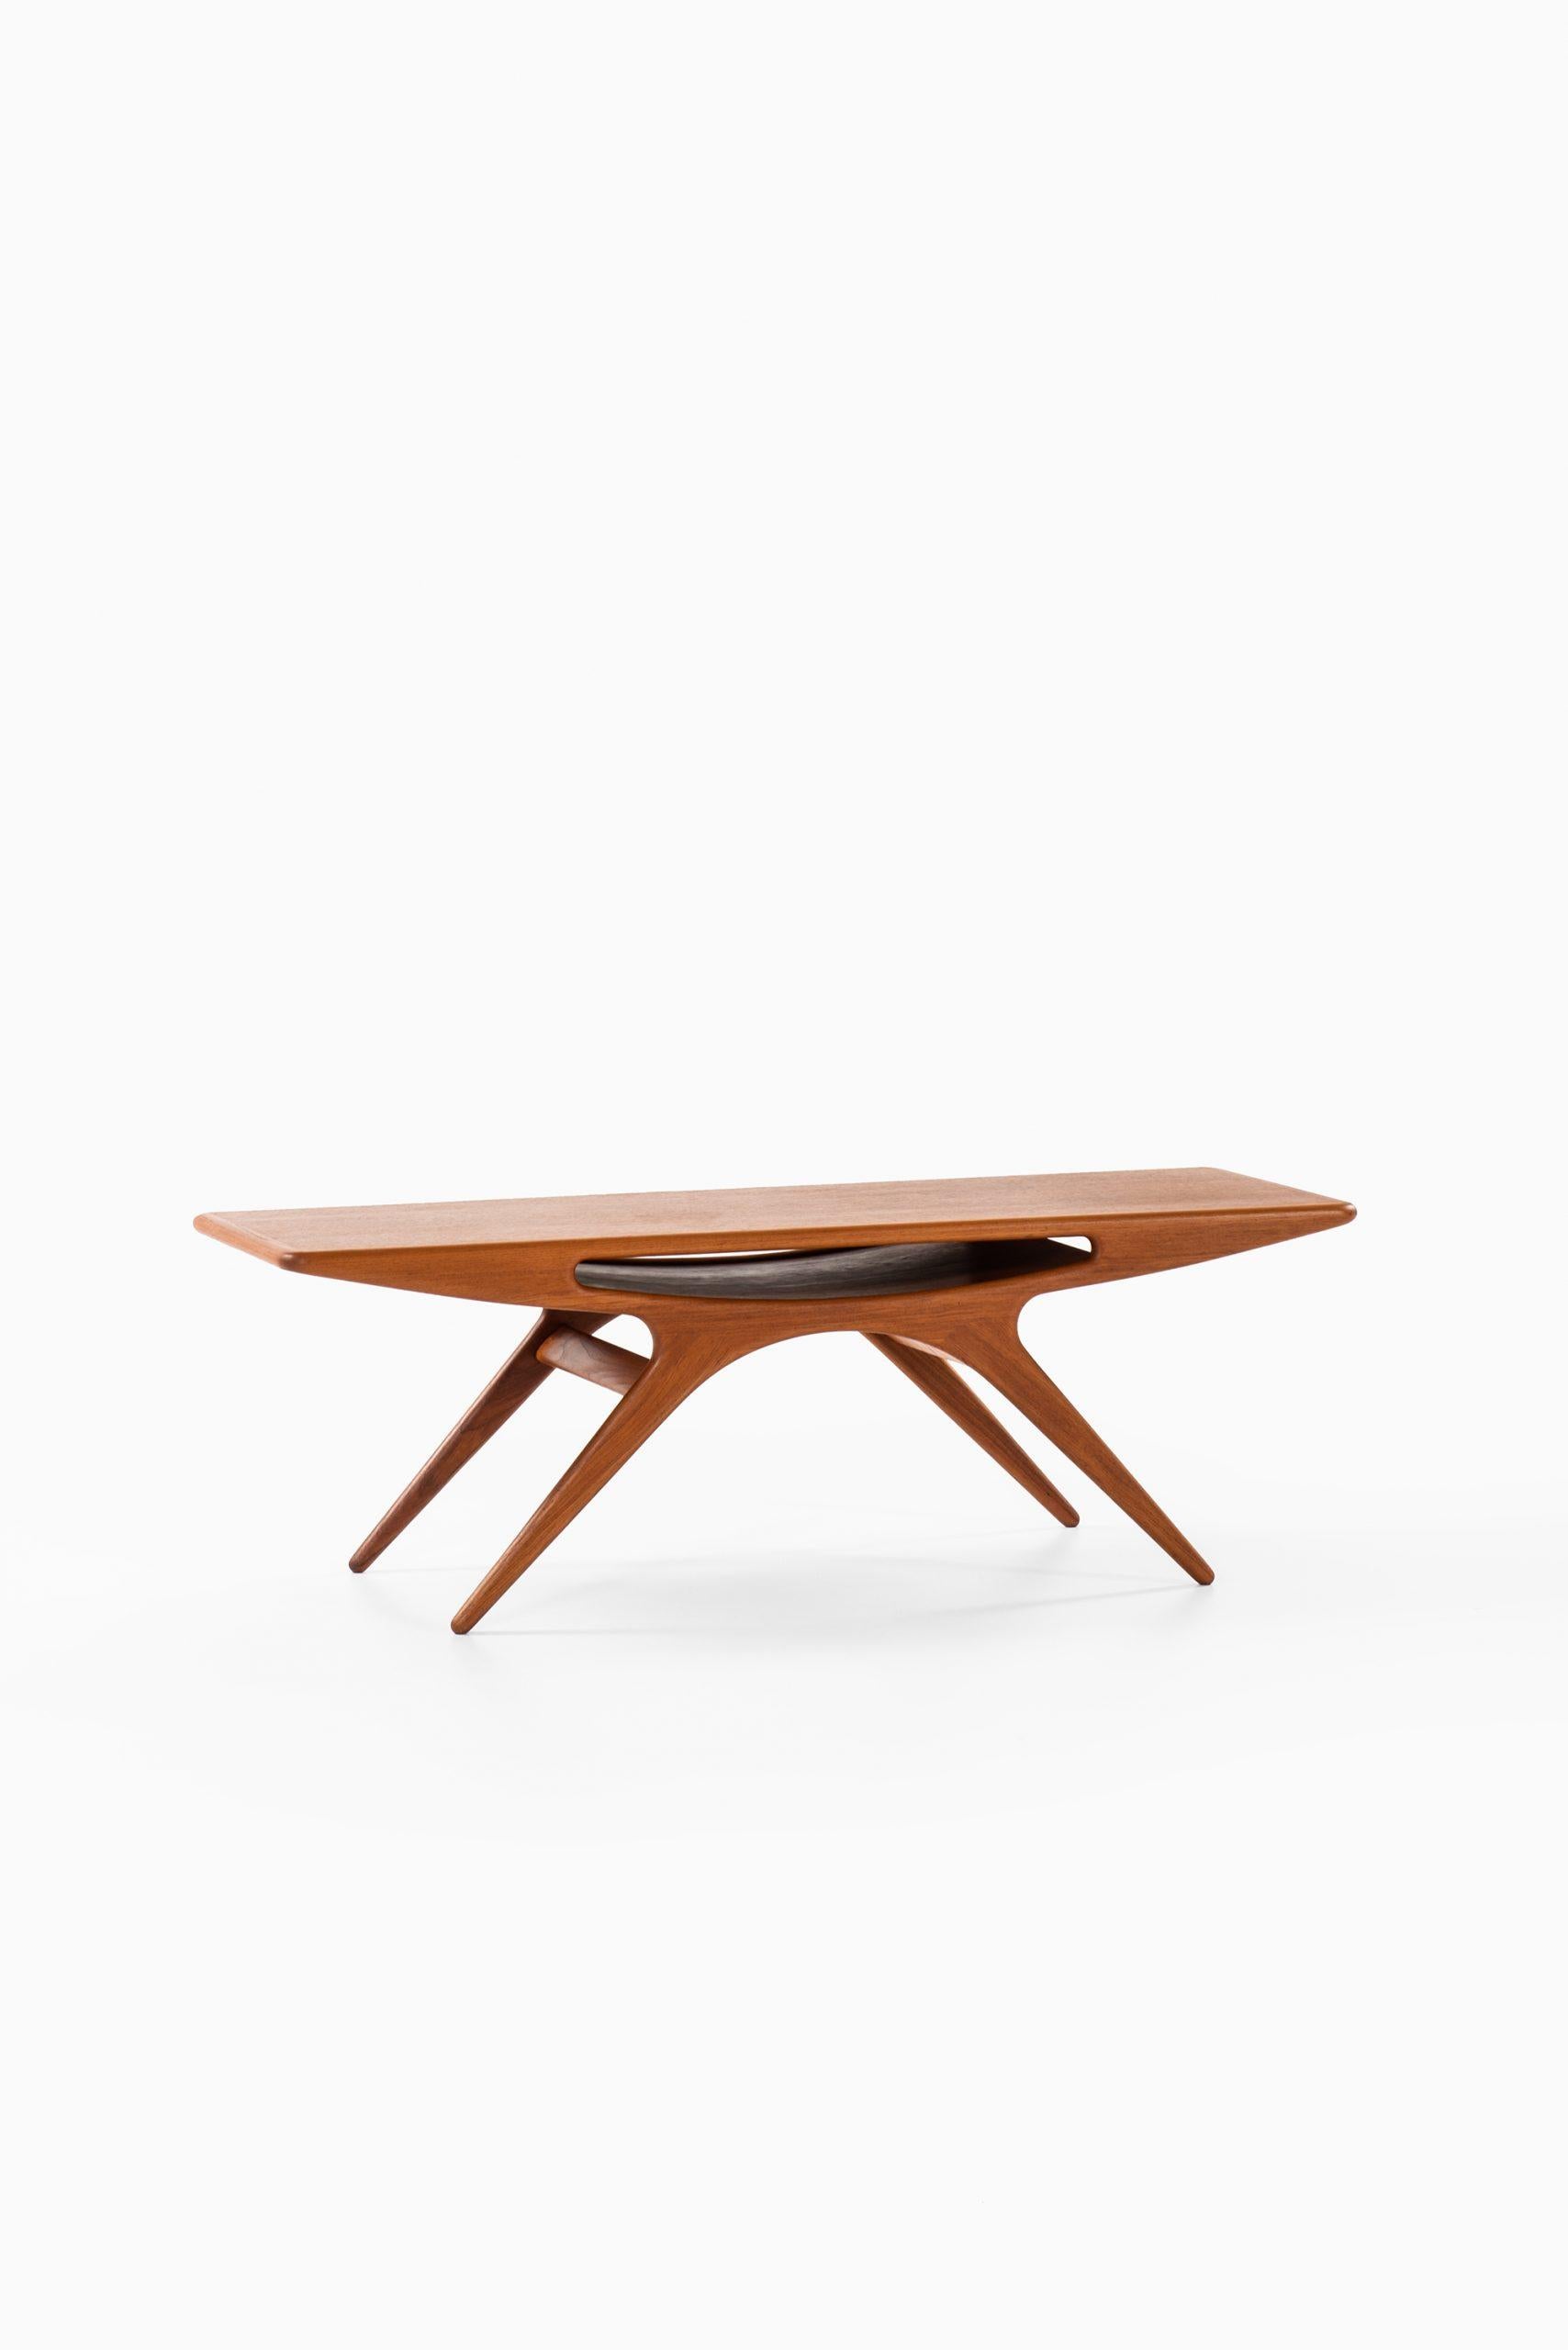 Smile table, Smilebordet, UFO table or Smiling table designed by Johannes Andersen. Produced by CFC Silkeborg in Denmark.